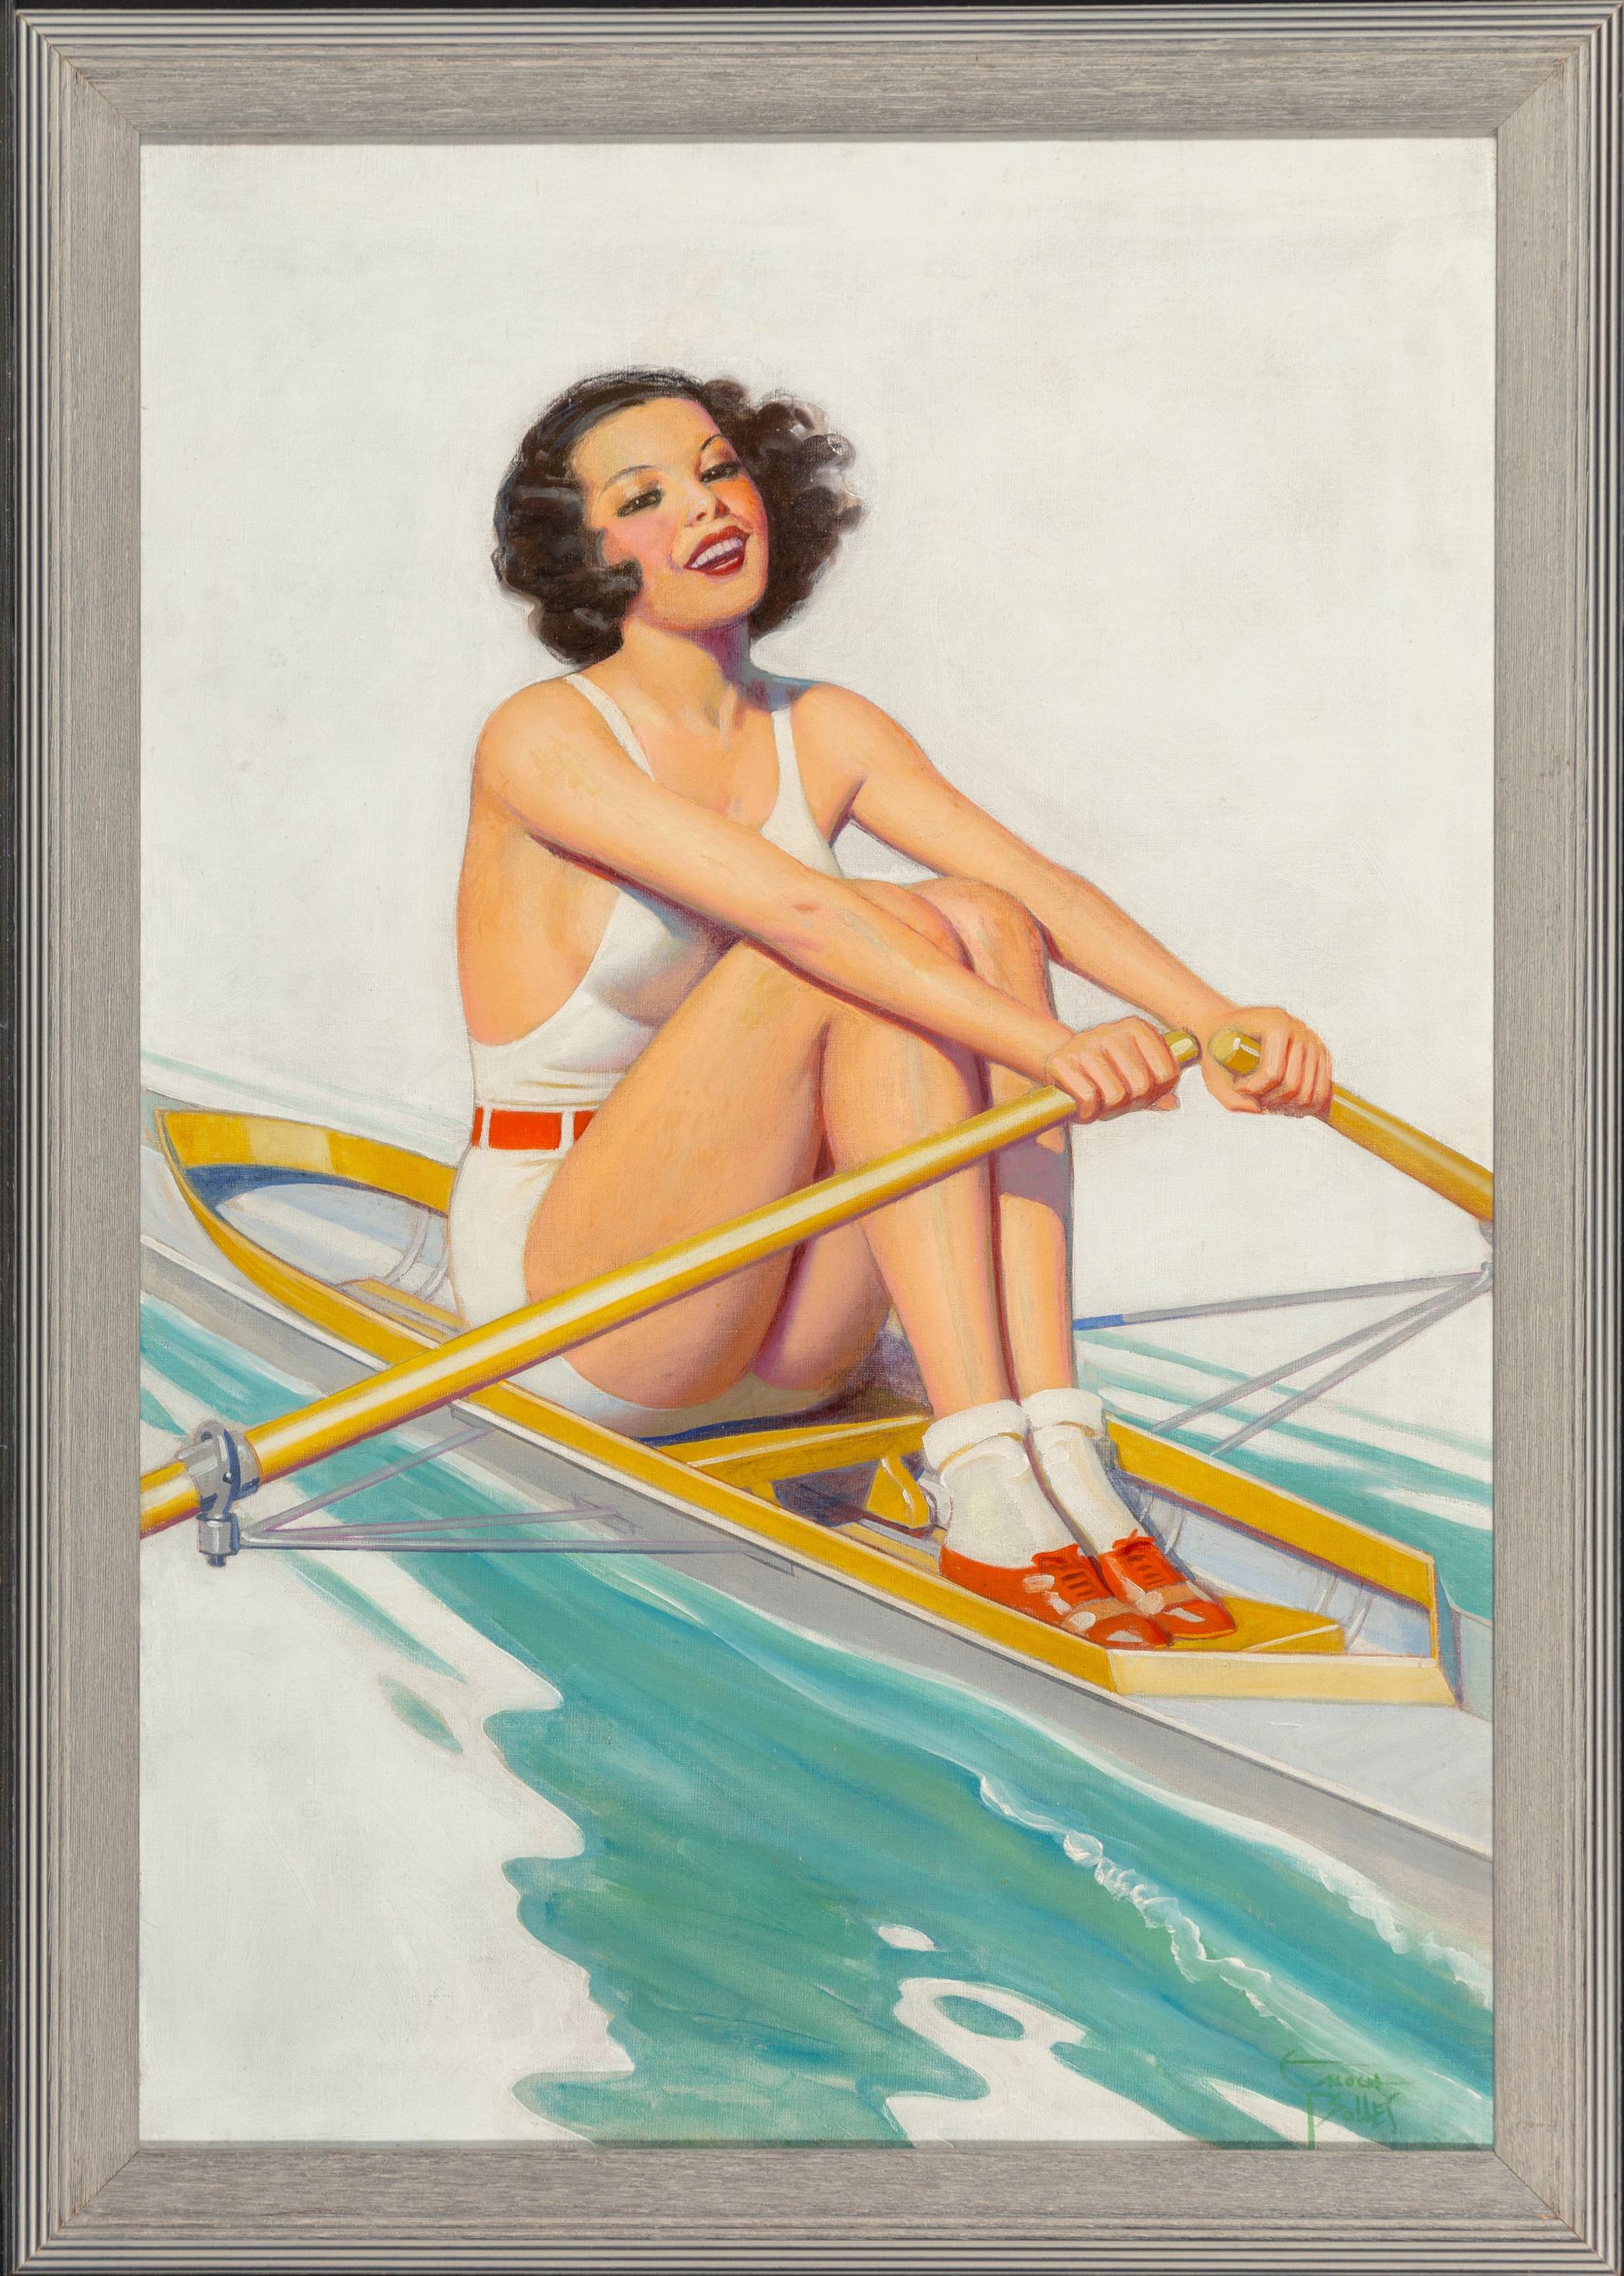 A Winning Personality - Painting by Enoch Bolles